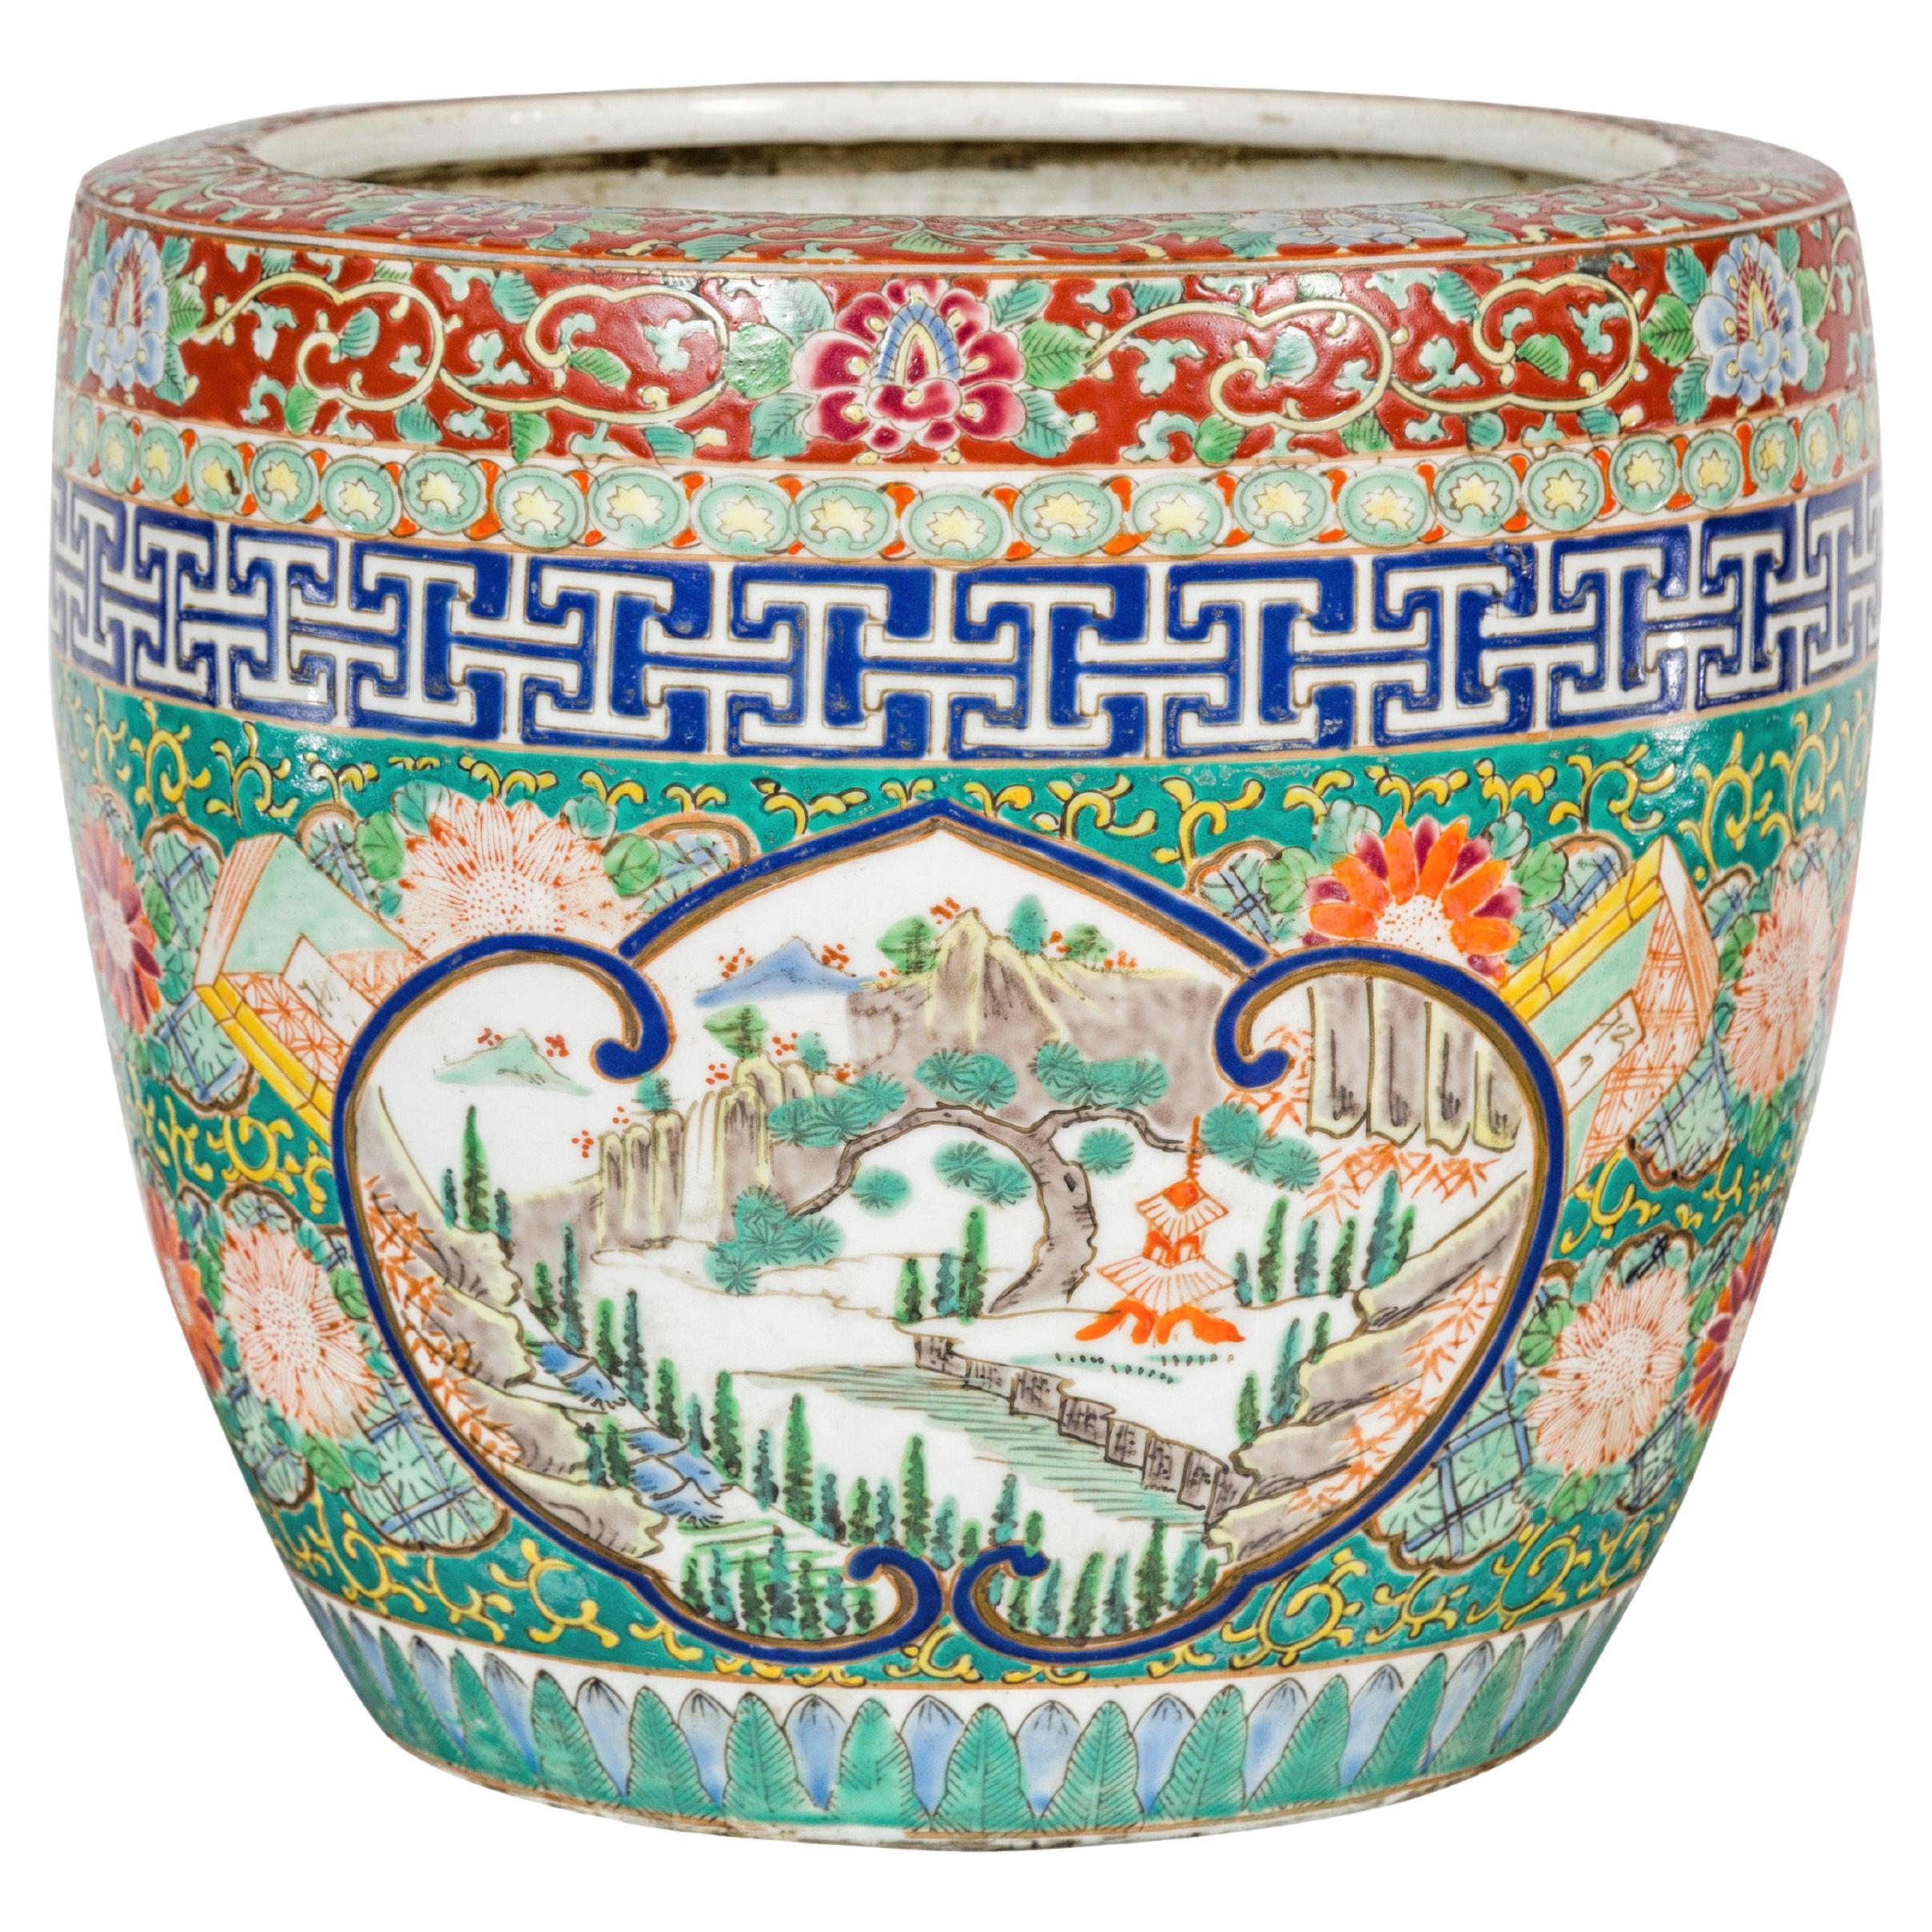 Japanese Hand-Painted Imari Planter with Landscape, Tree, Flowers and Books